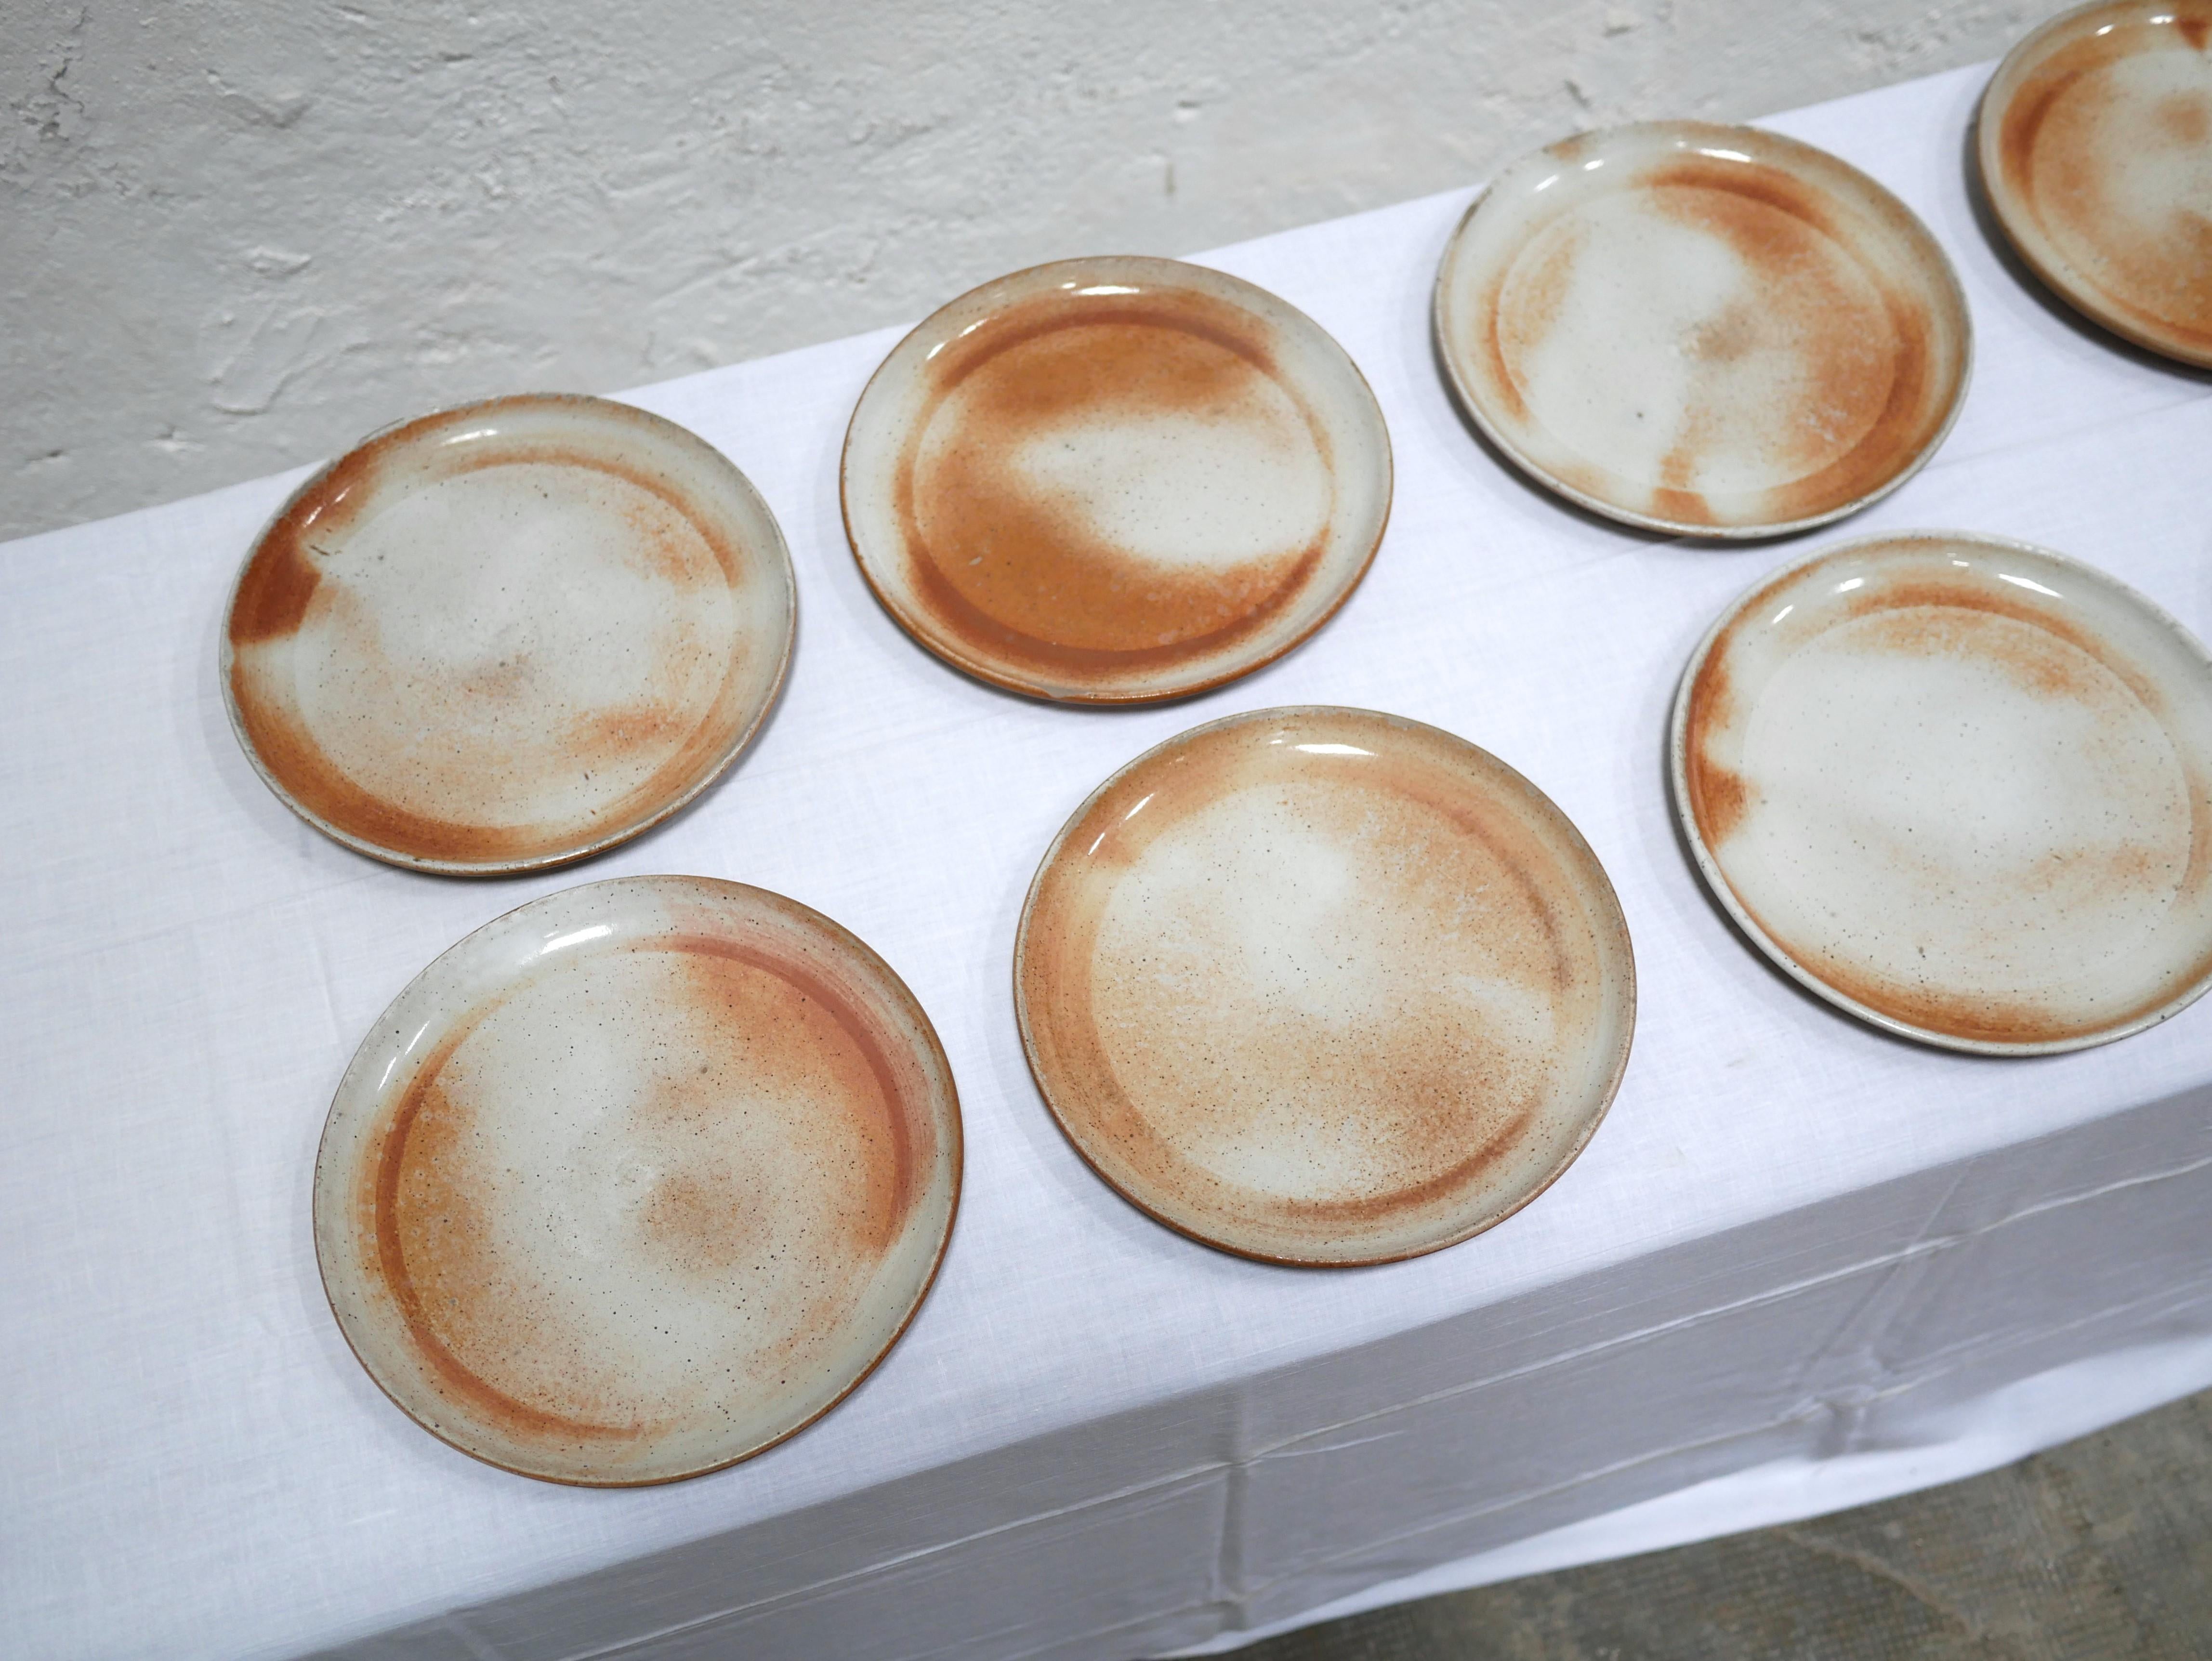 Series of 9 vintage stoneware plates by the Poteries du Marais, France 2